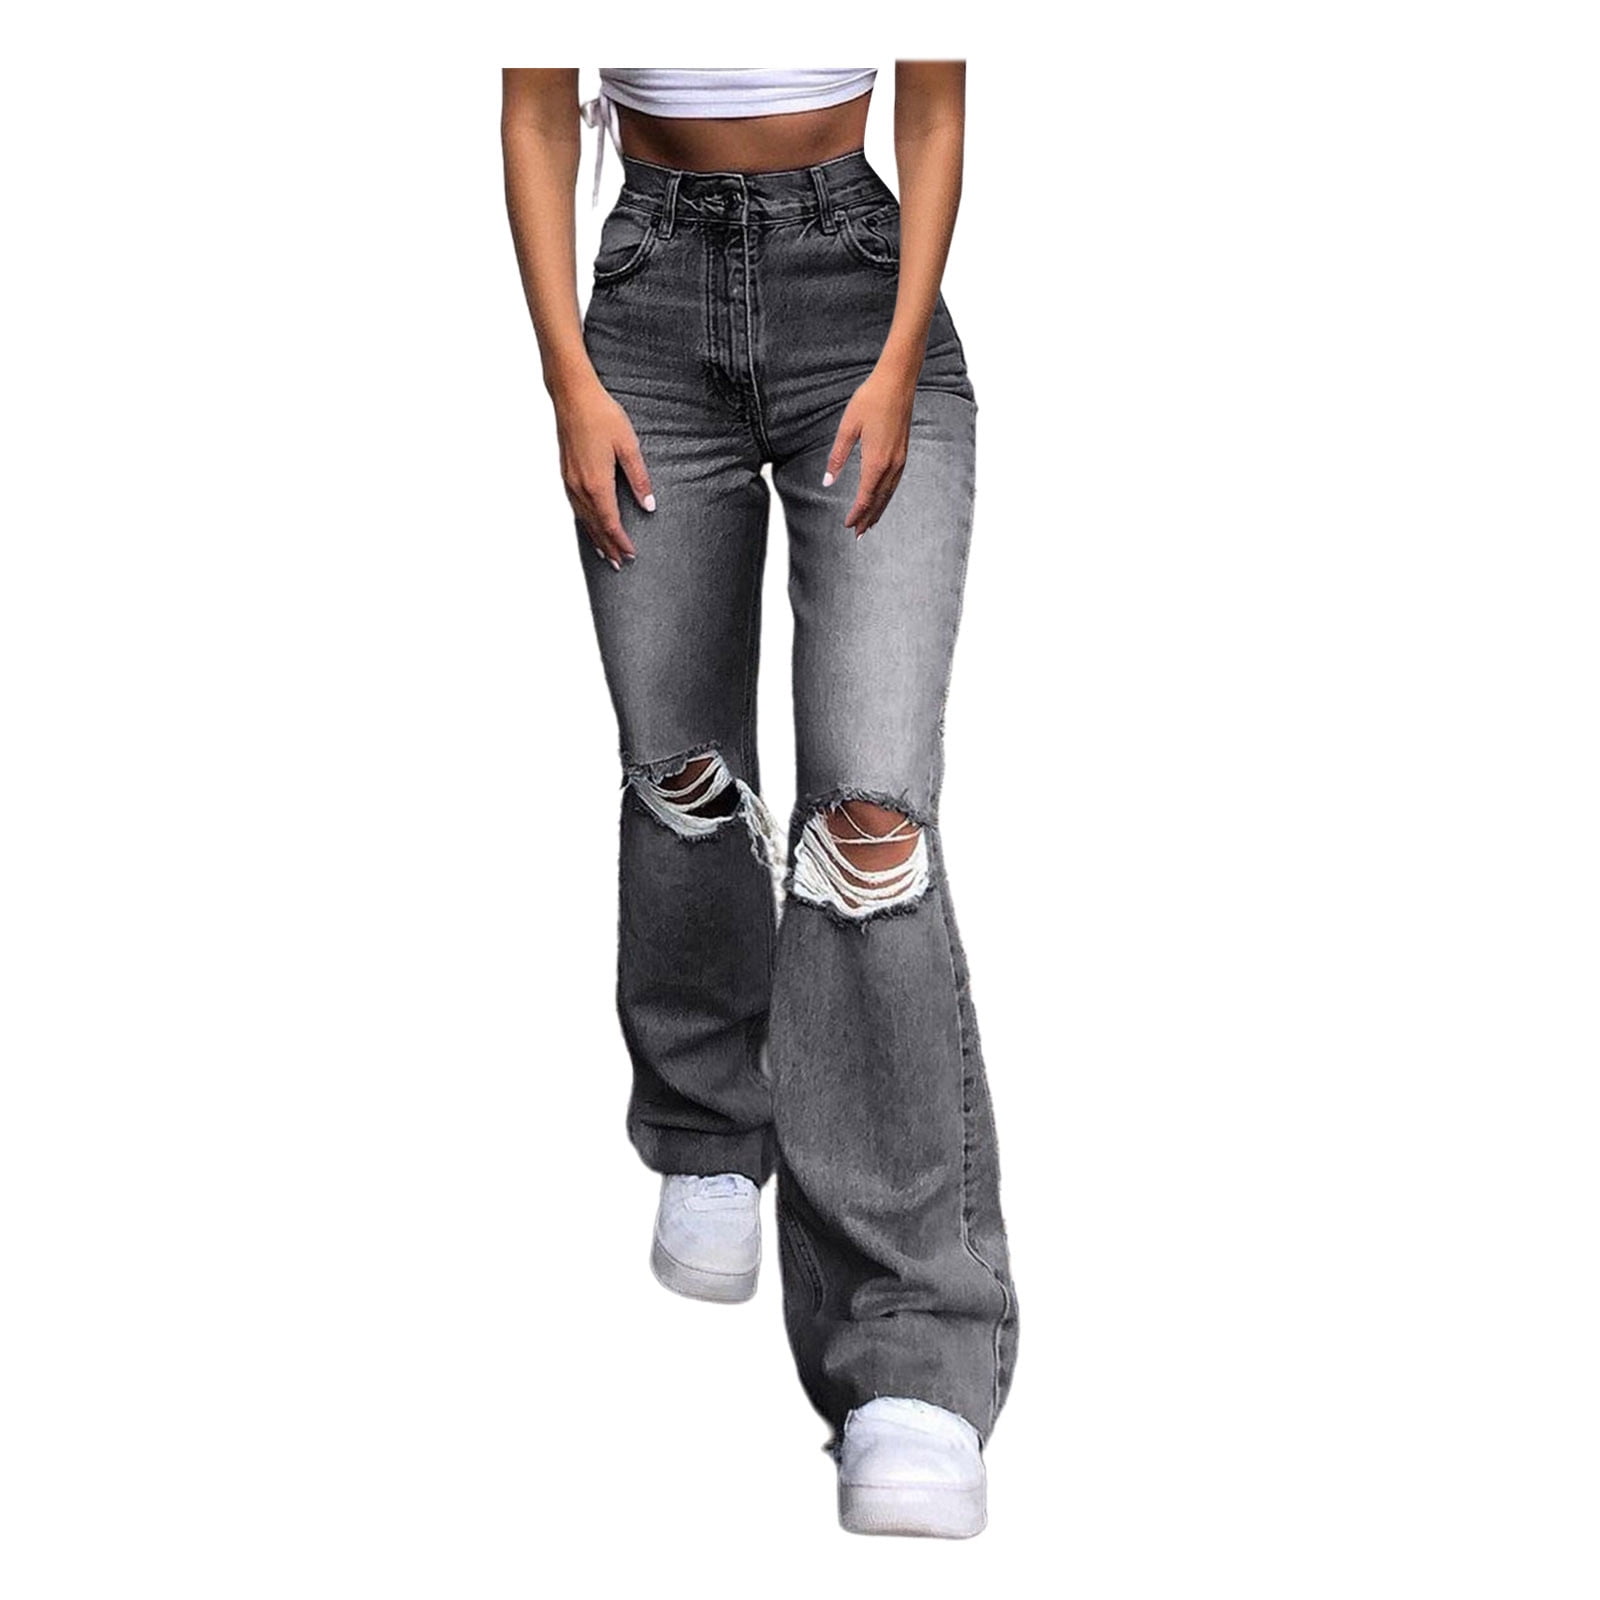 Bigersell Stretch Ripped Skinny Jeans Full Length Pants Jeans